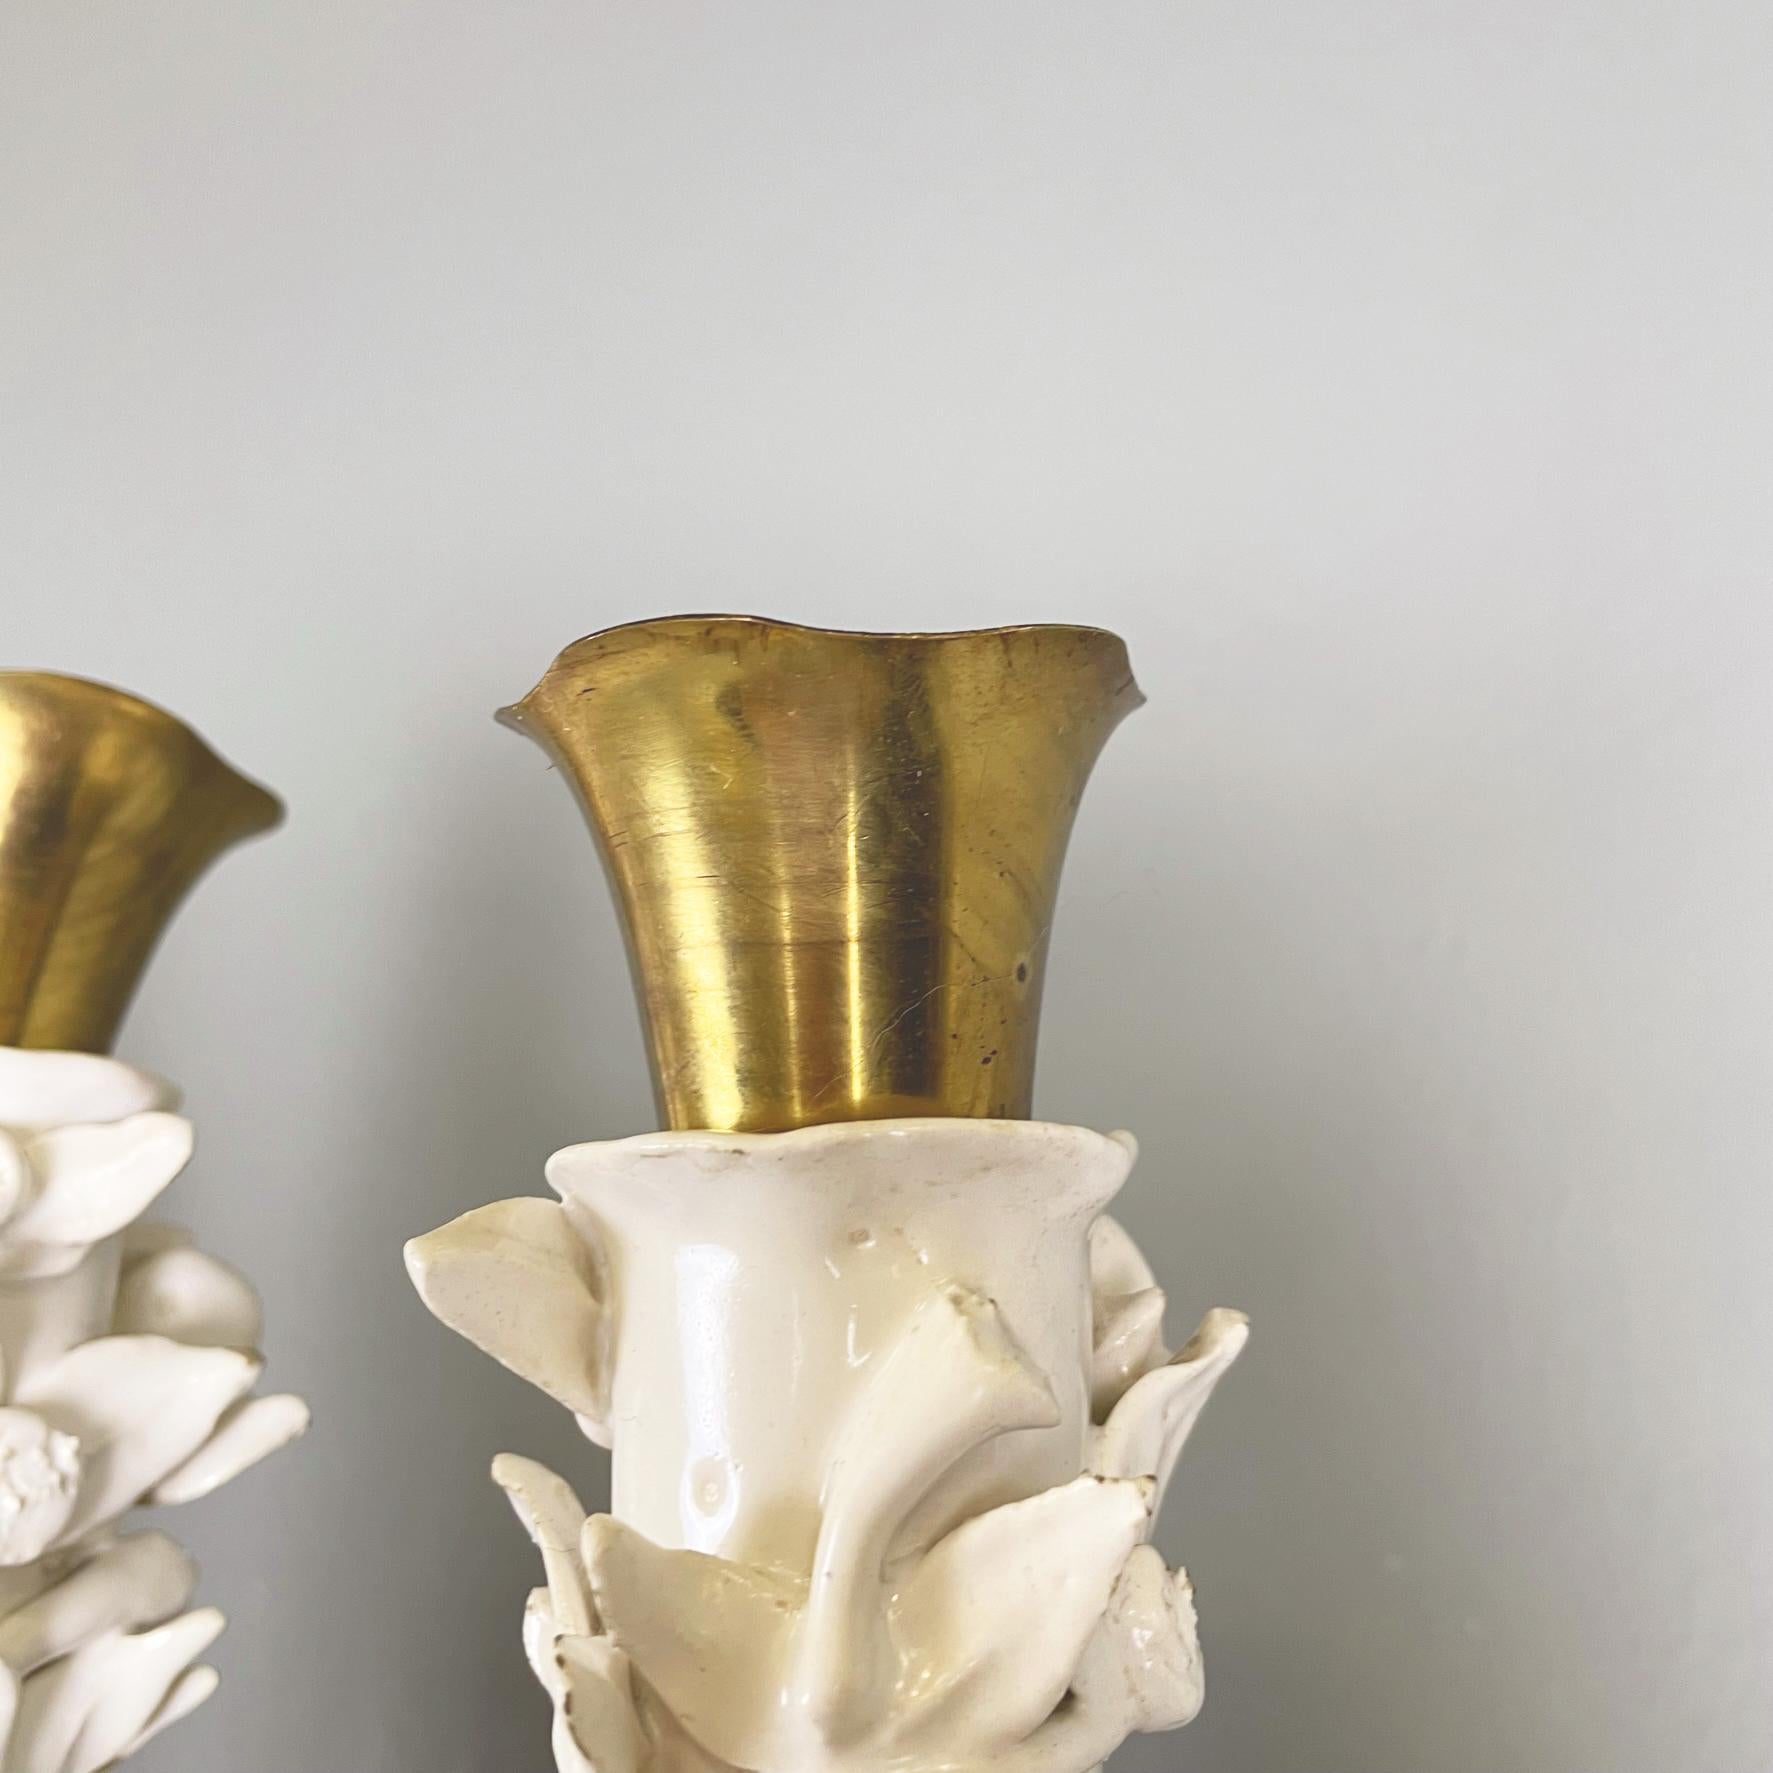 Italian Midcentury Brass White Floral Ceramic Wall Lamps by Luigi Zortea, 1949 For Sale 4